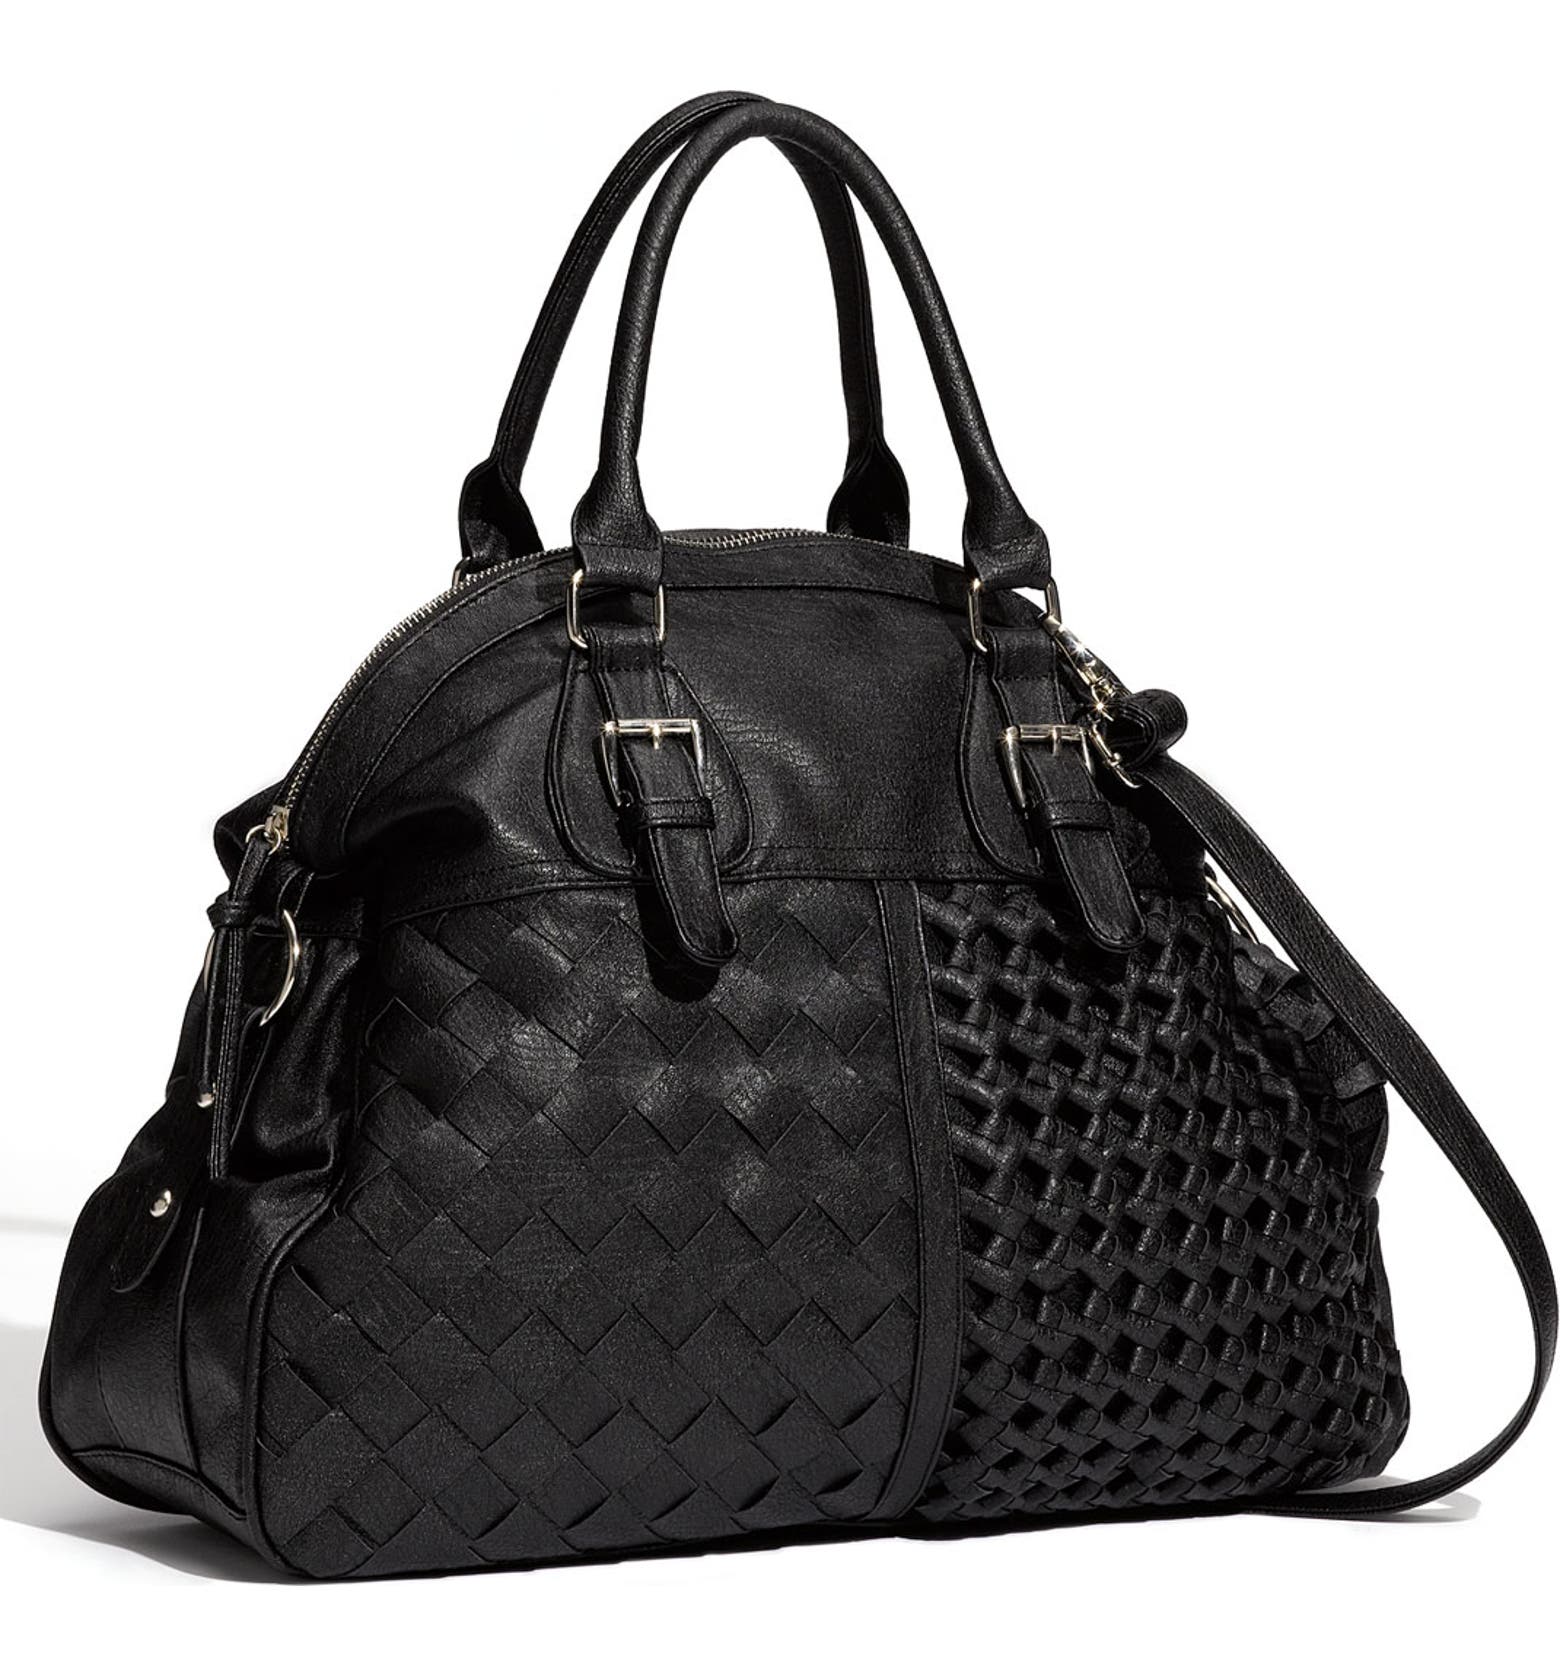 NB Handbags Woven Faux Leather Bowling Bag | Nordstrom